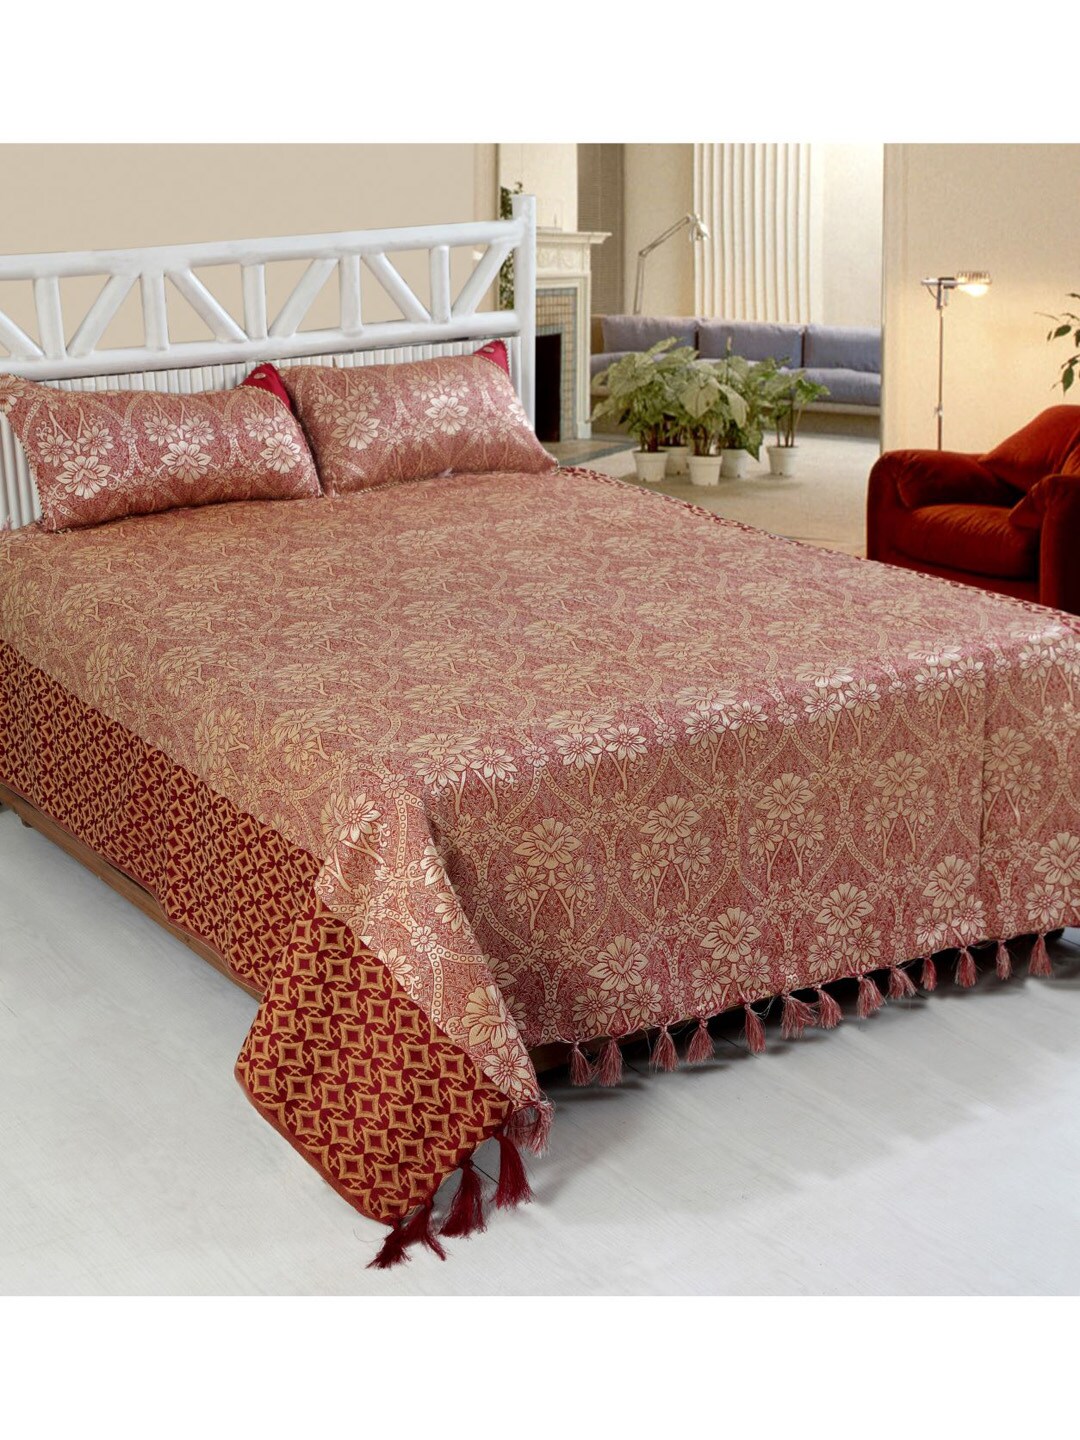 Varde Unisex Red & Gold Colored Woven Design Double Bed Cover With 2 Pillow Covers Price in India